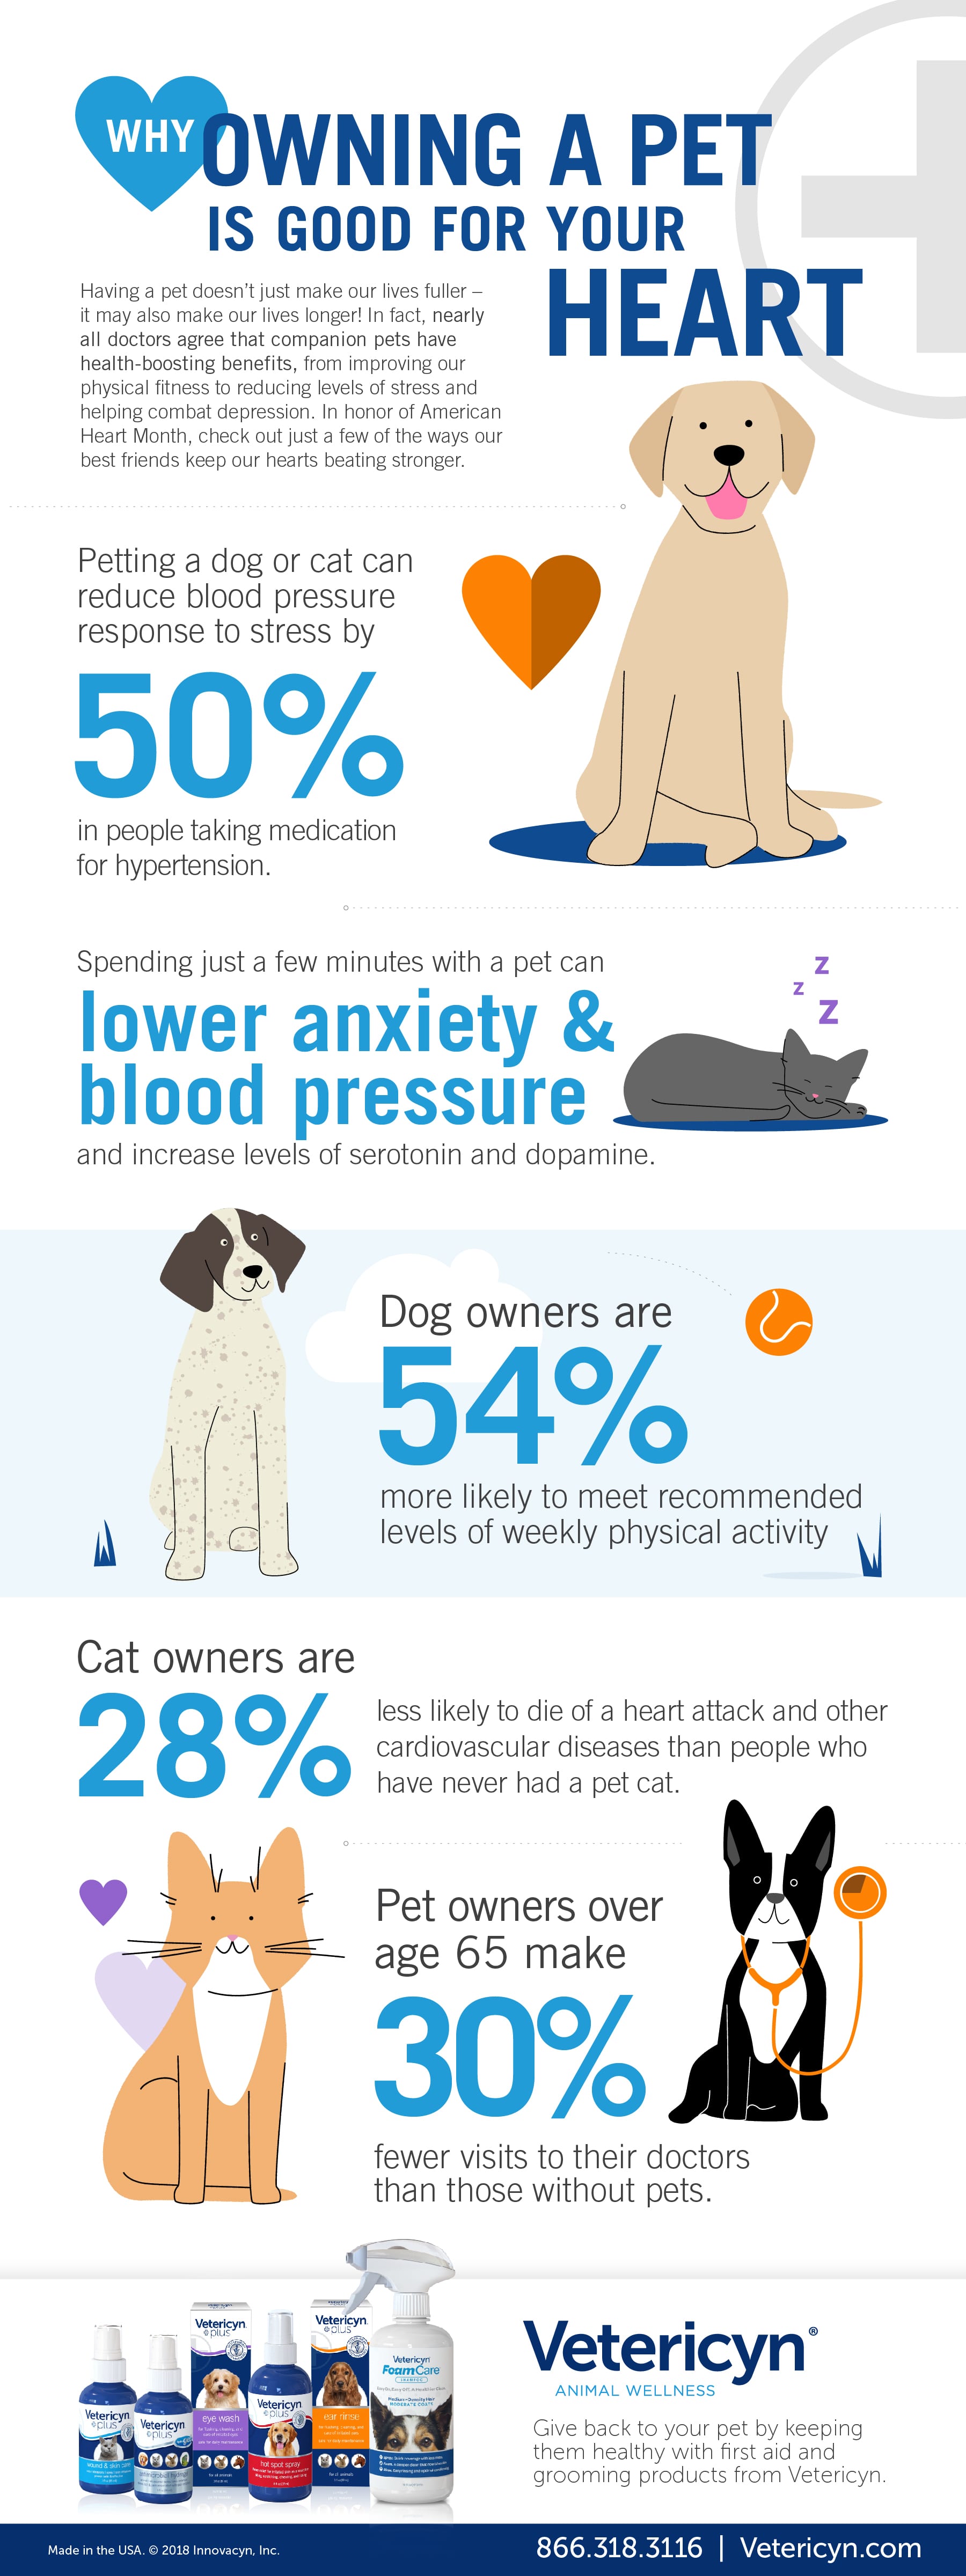 Does Owning A Dog Reduce Heart Attack